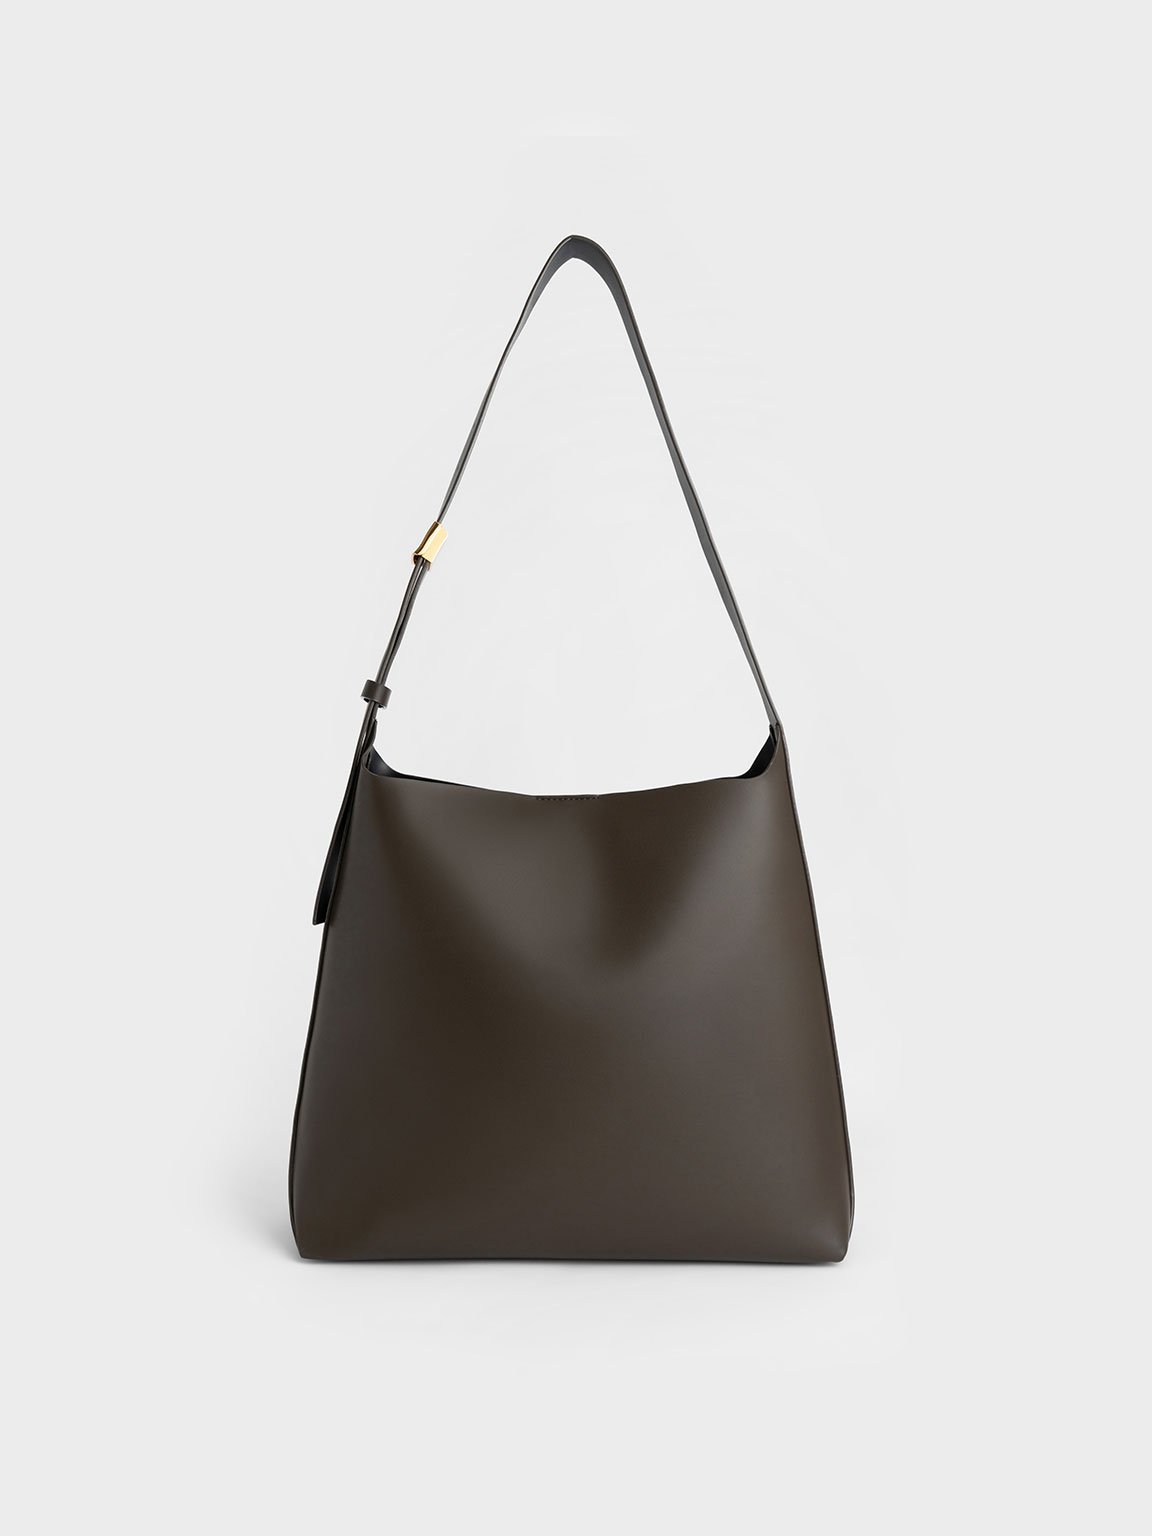 Bags items - Discover them on BagSTORE Shop